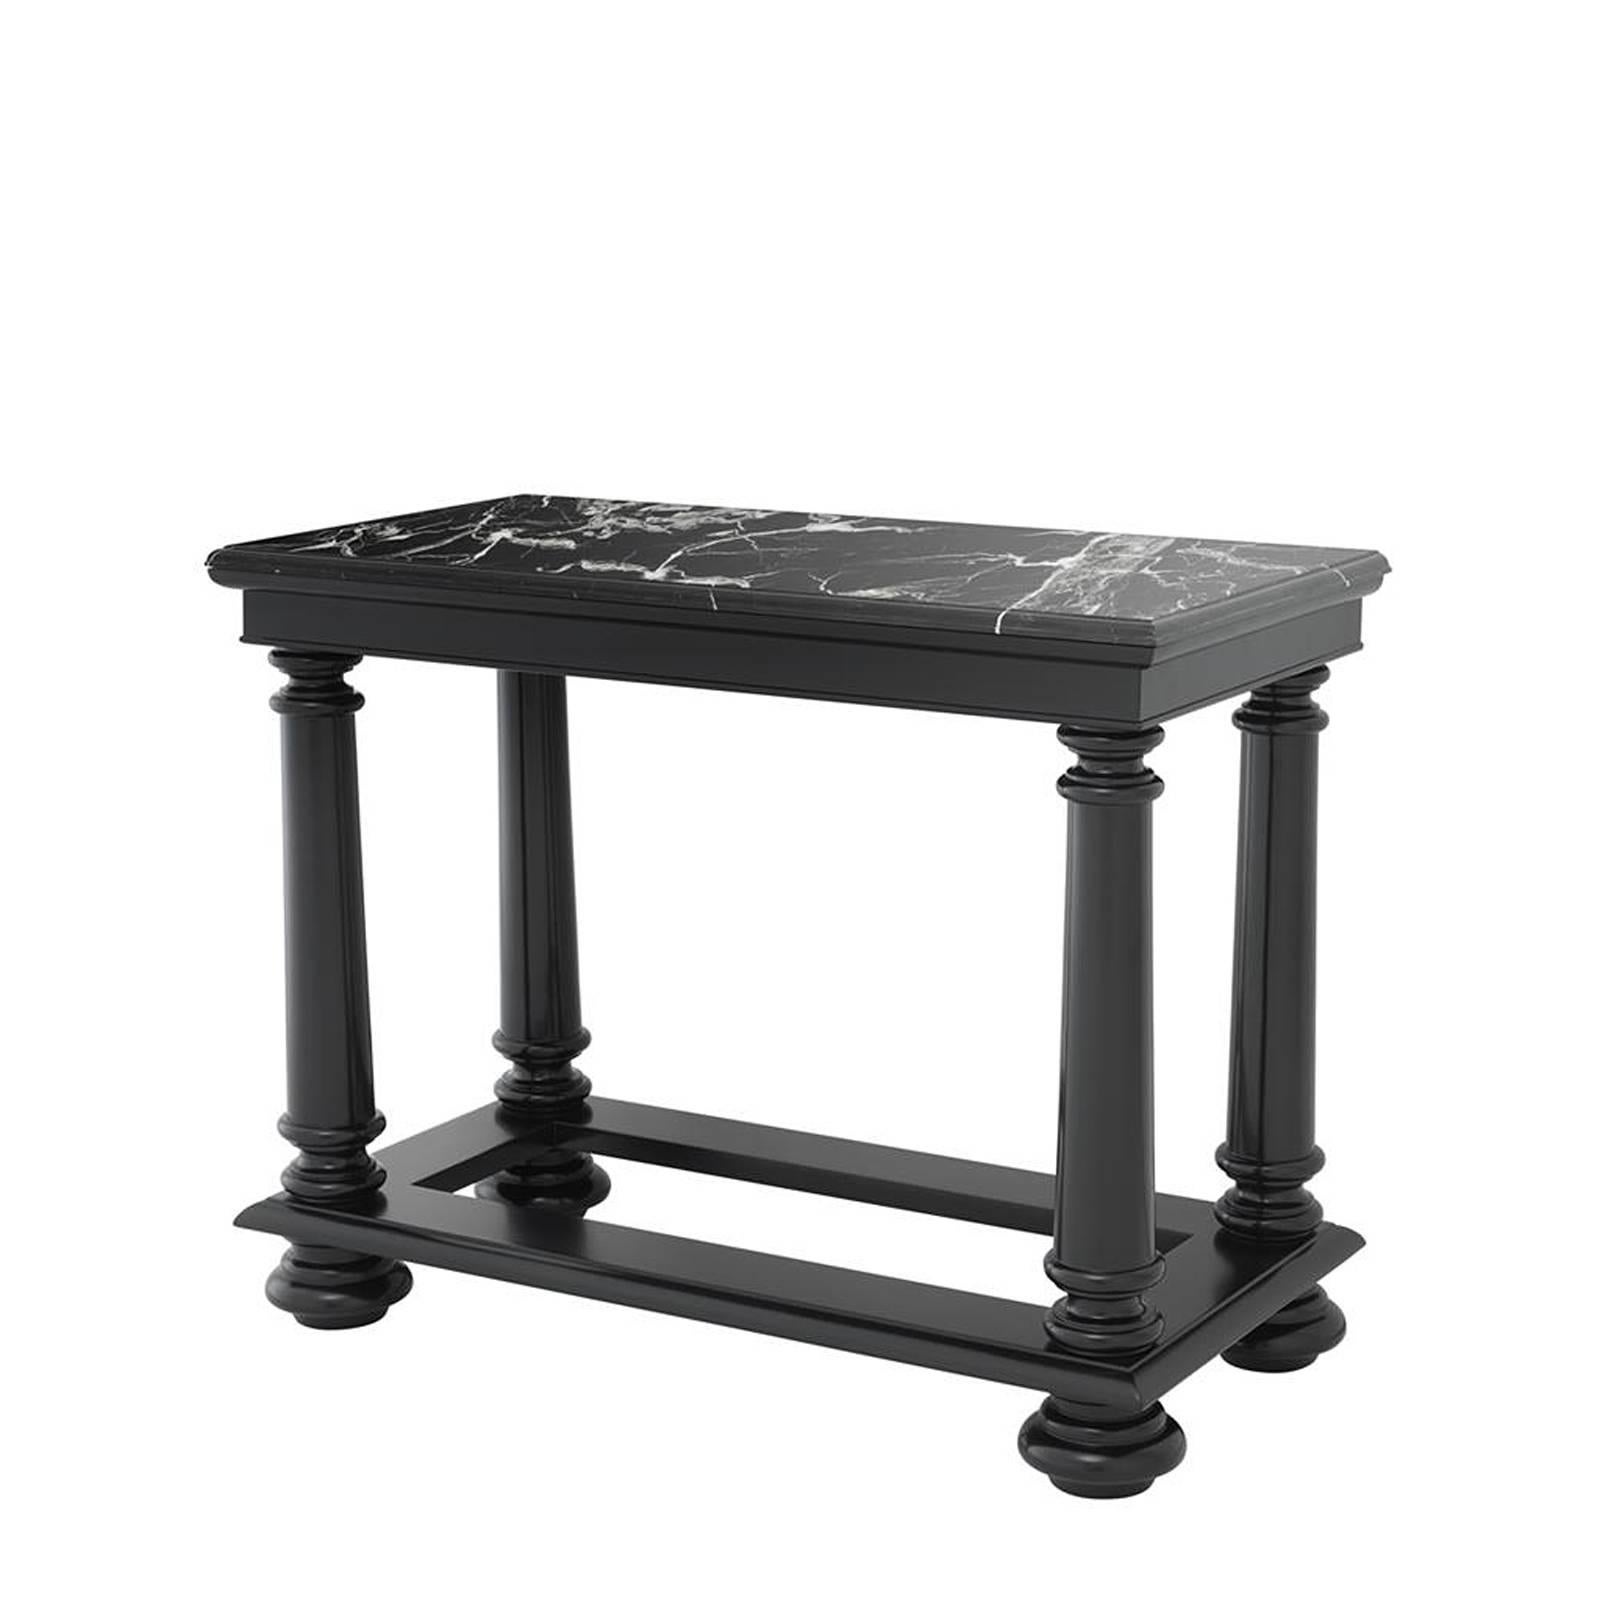 Blackened Harth Medium Console Table in Solid Mahogany Wood with Marble Top